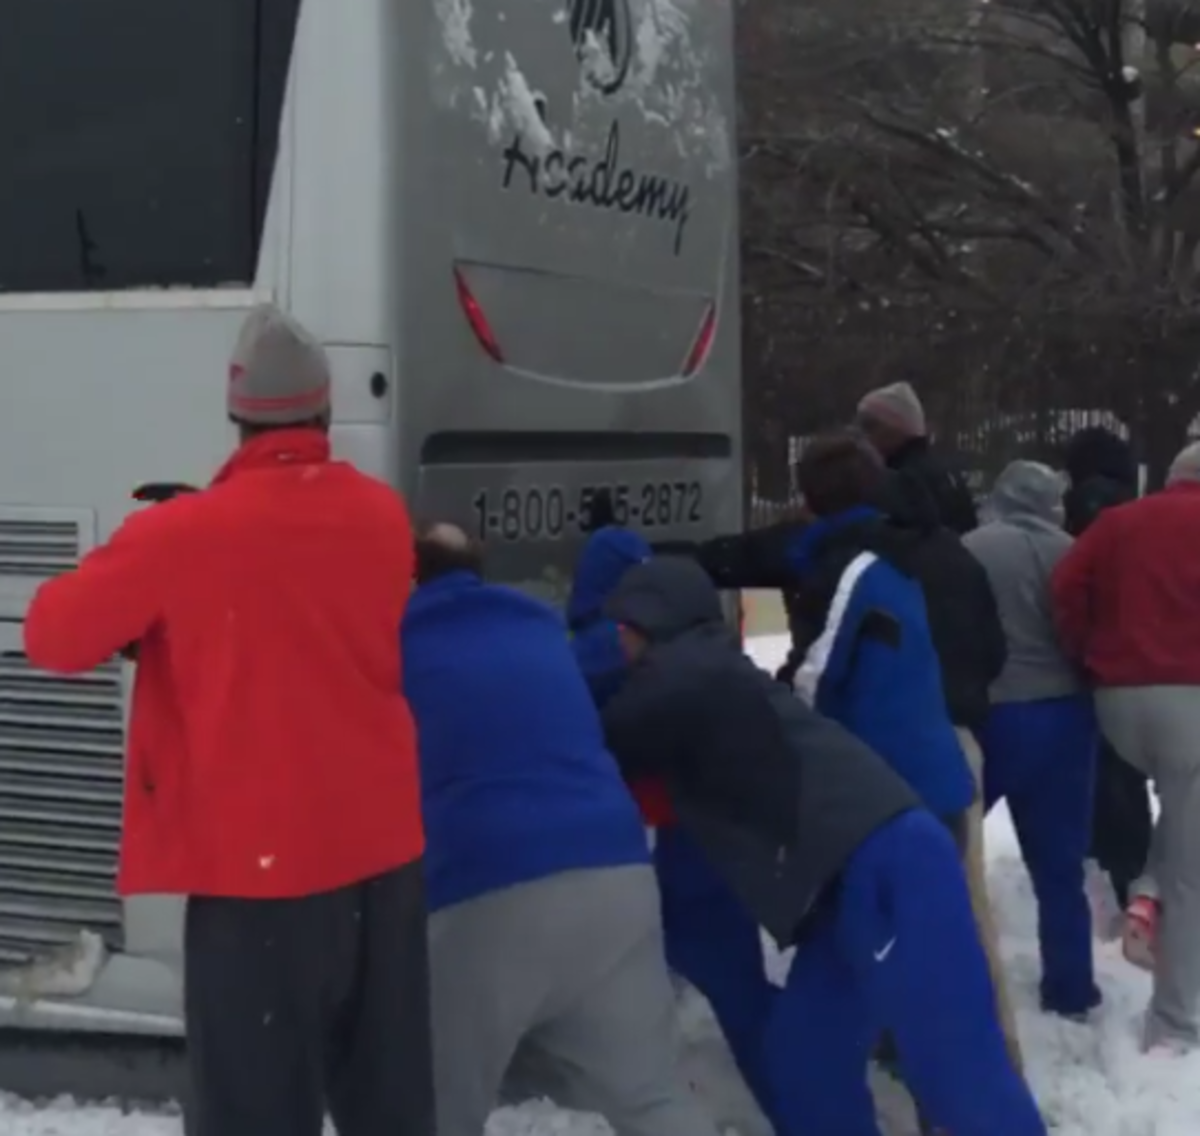 SMU players push bus after it gets stuck in snow.